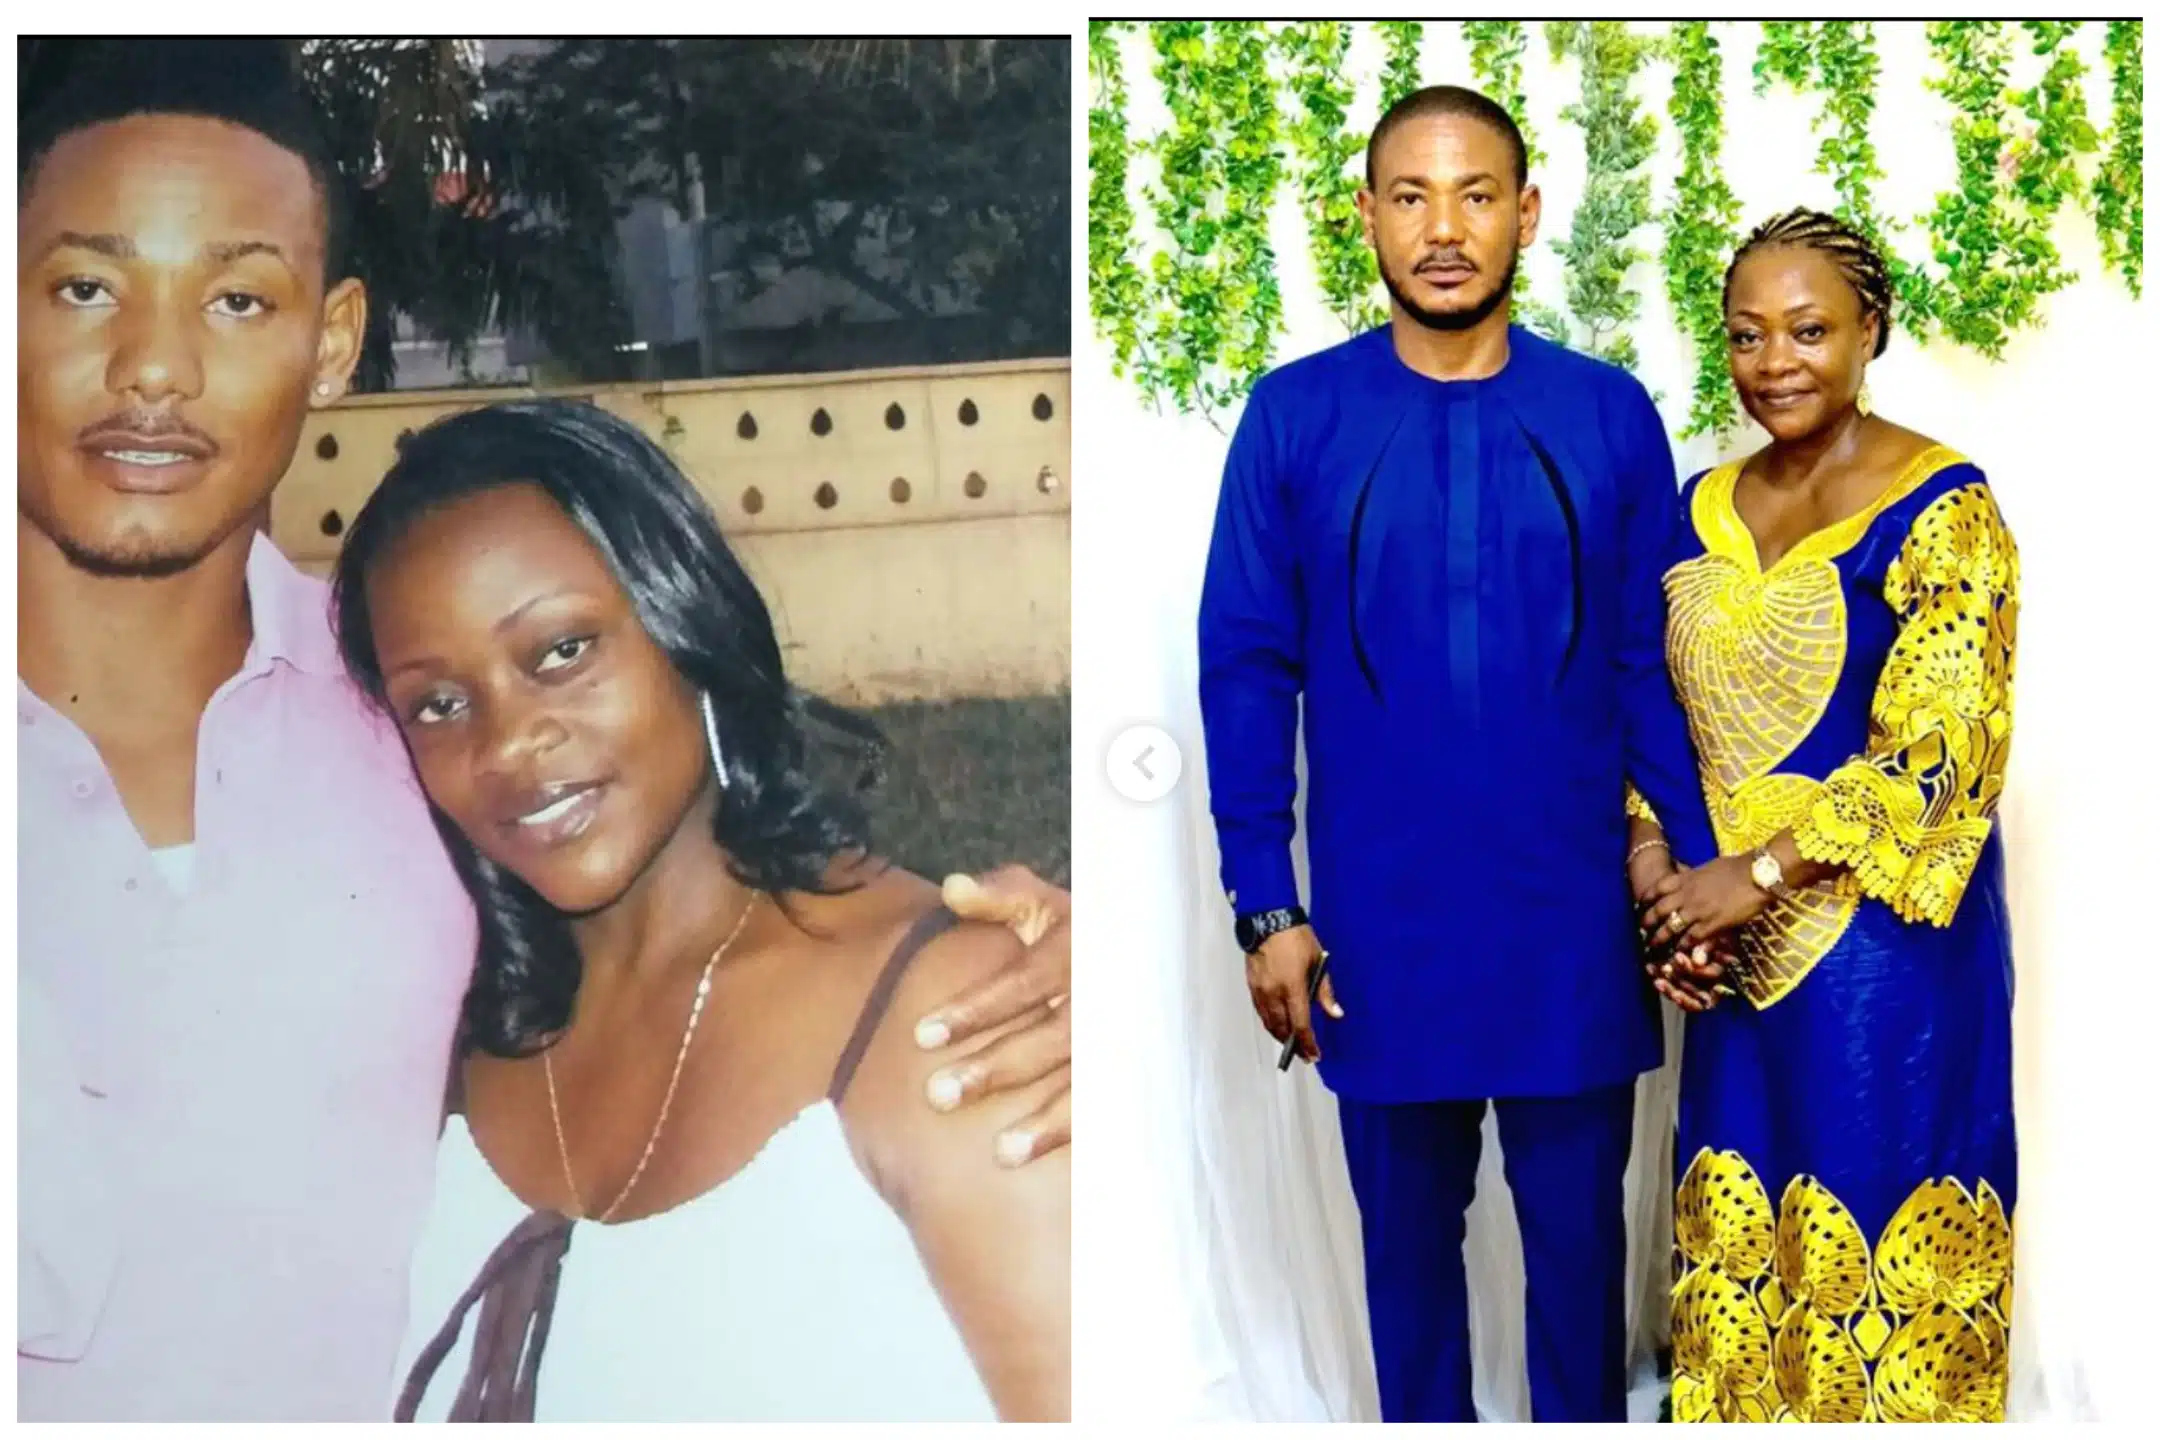 Nollywood: ‘Leave My Wife’ – Popular Actor Blasts Those Age-shaming His Wife